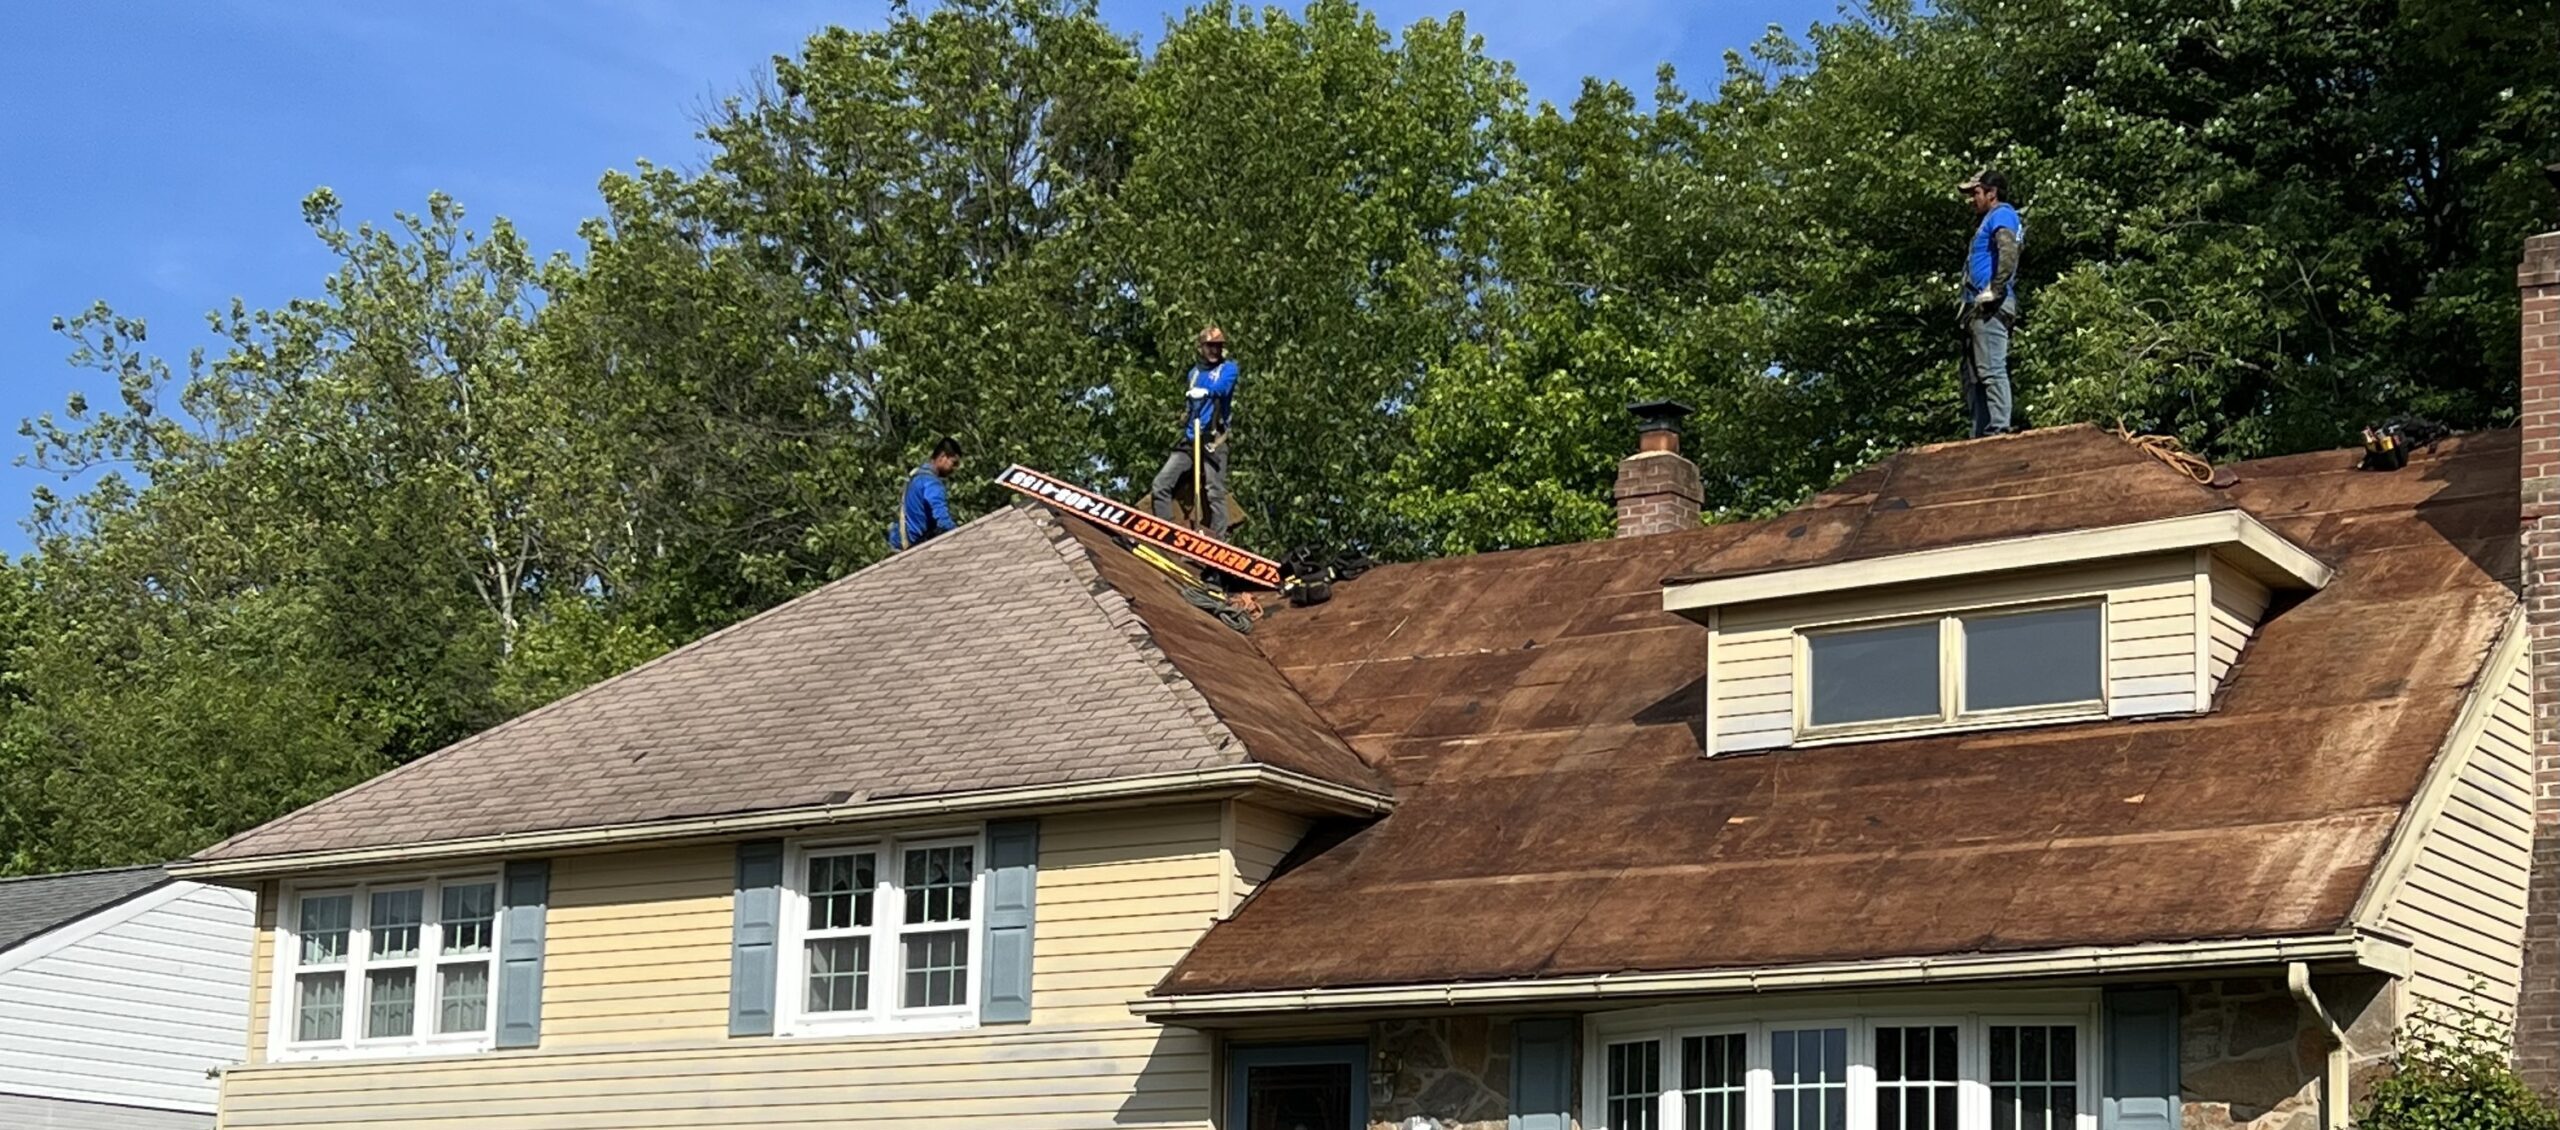 G. Fedale Roofing and Siding Installing A New Roof for Roofs from the Heart in Wilmington, Delaware